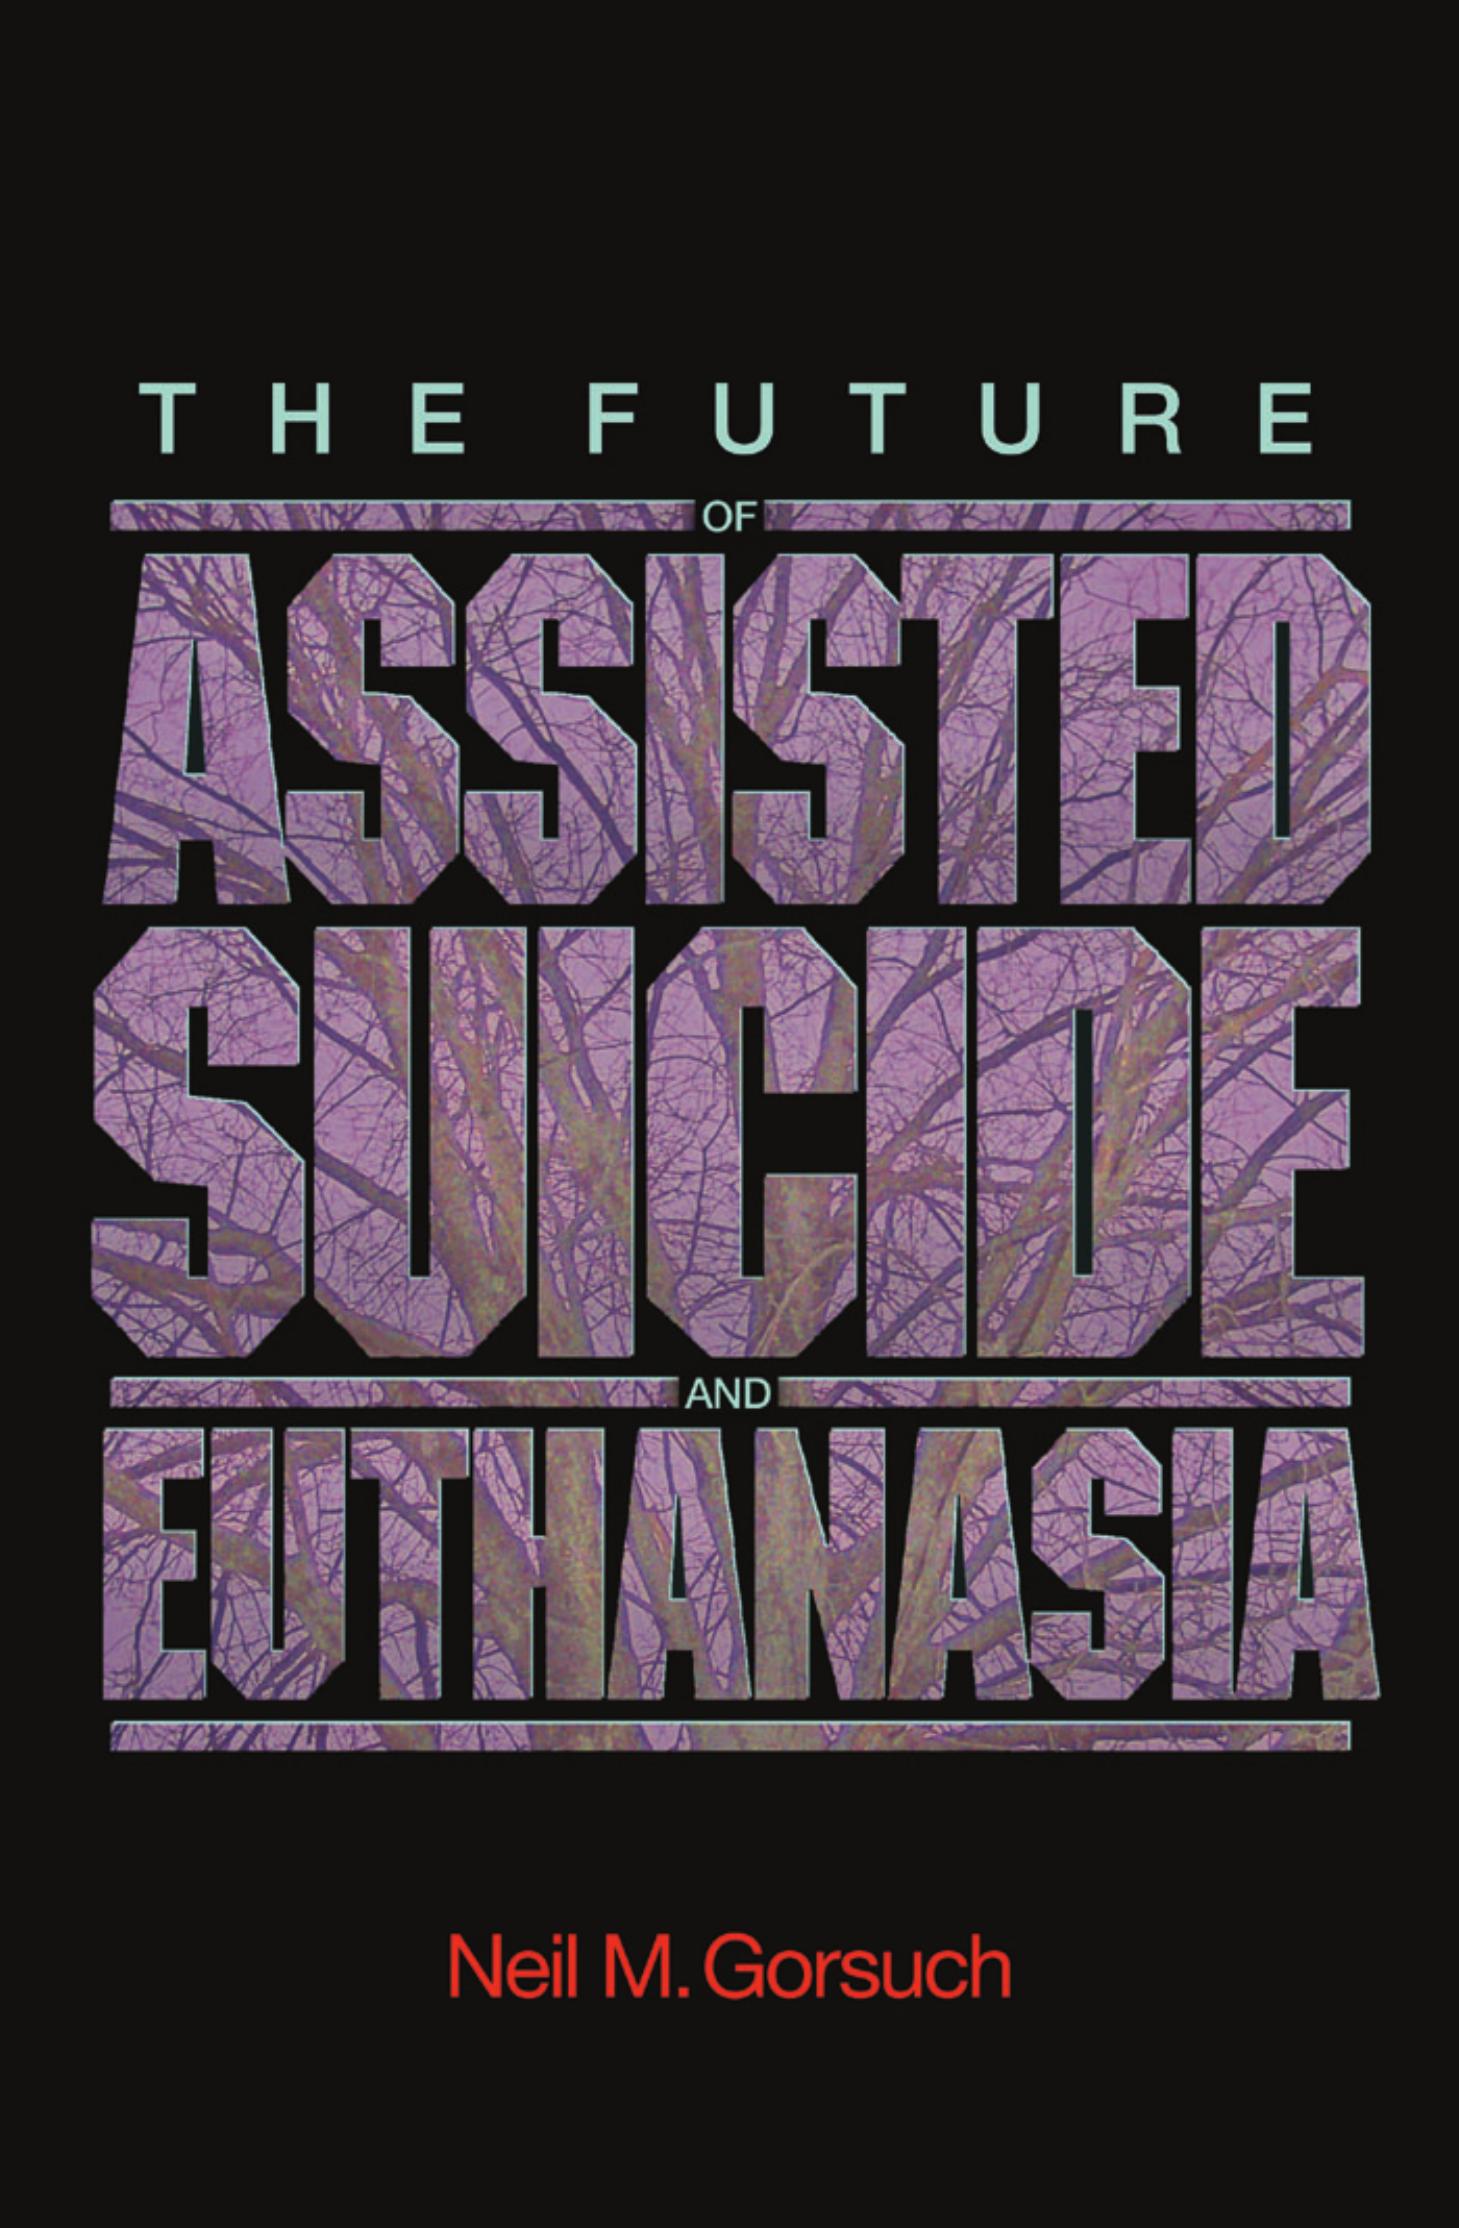 The Future of Assisted Suicide and Euthanasia by Neil M. Gorsuch